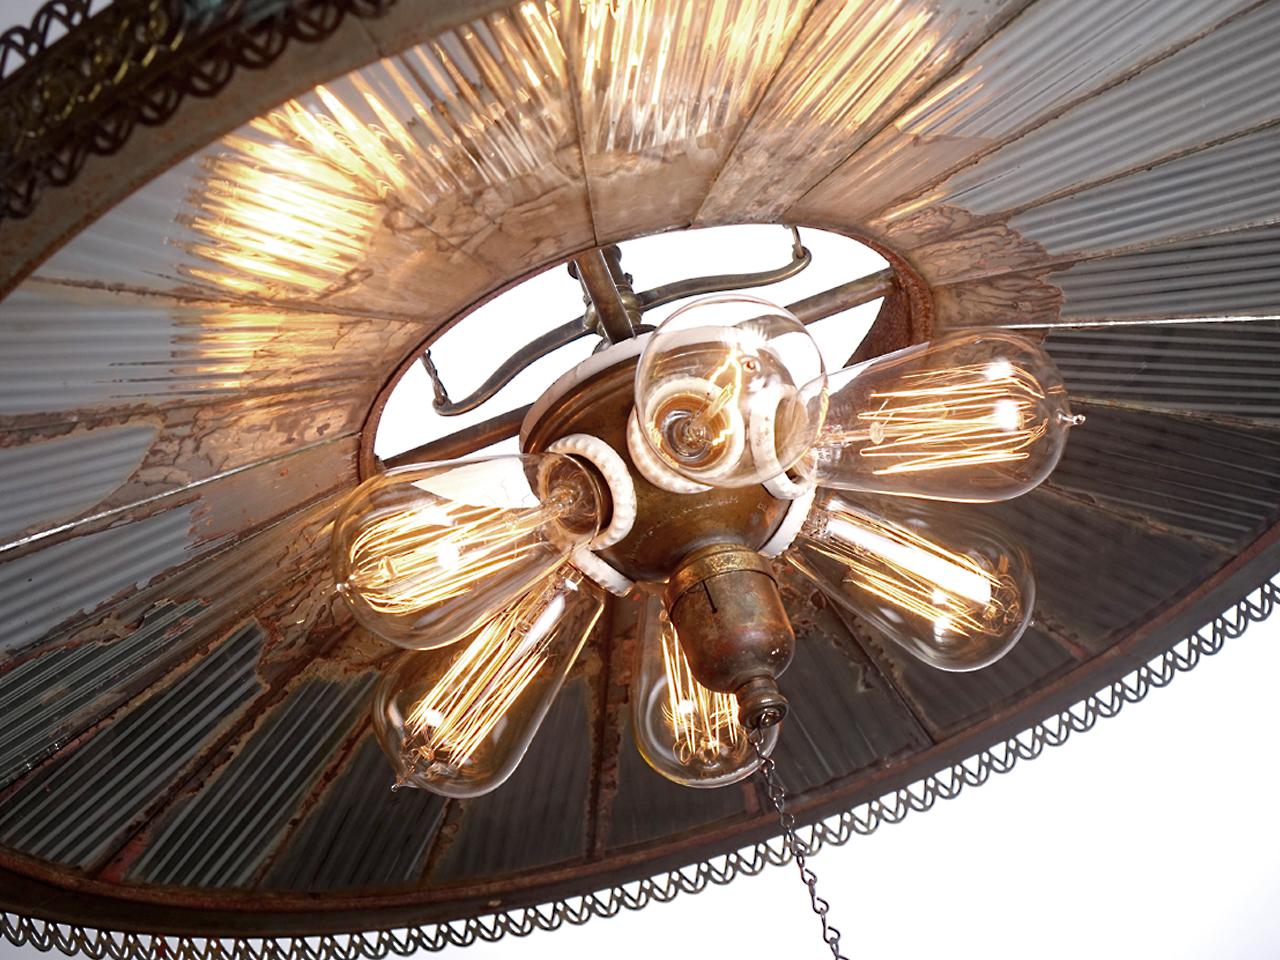 I've been doing this a while and in all the years I rarely get my hands on an example one like this. The mirrored ring of reflectors has a 35 inch diameter. All the original mirrors are there with no replacements and a wonderful rustic patina. The